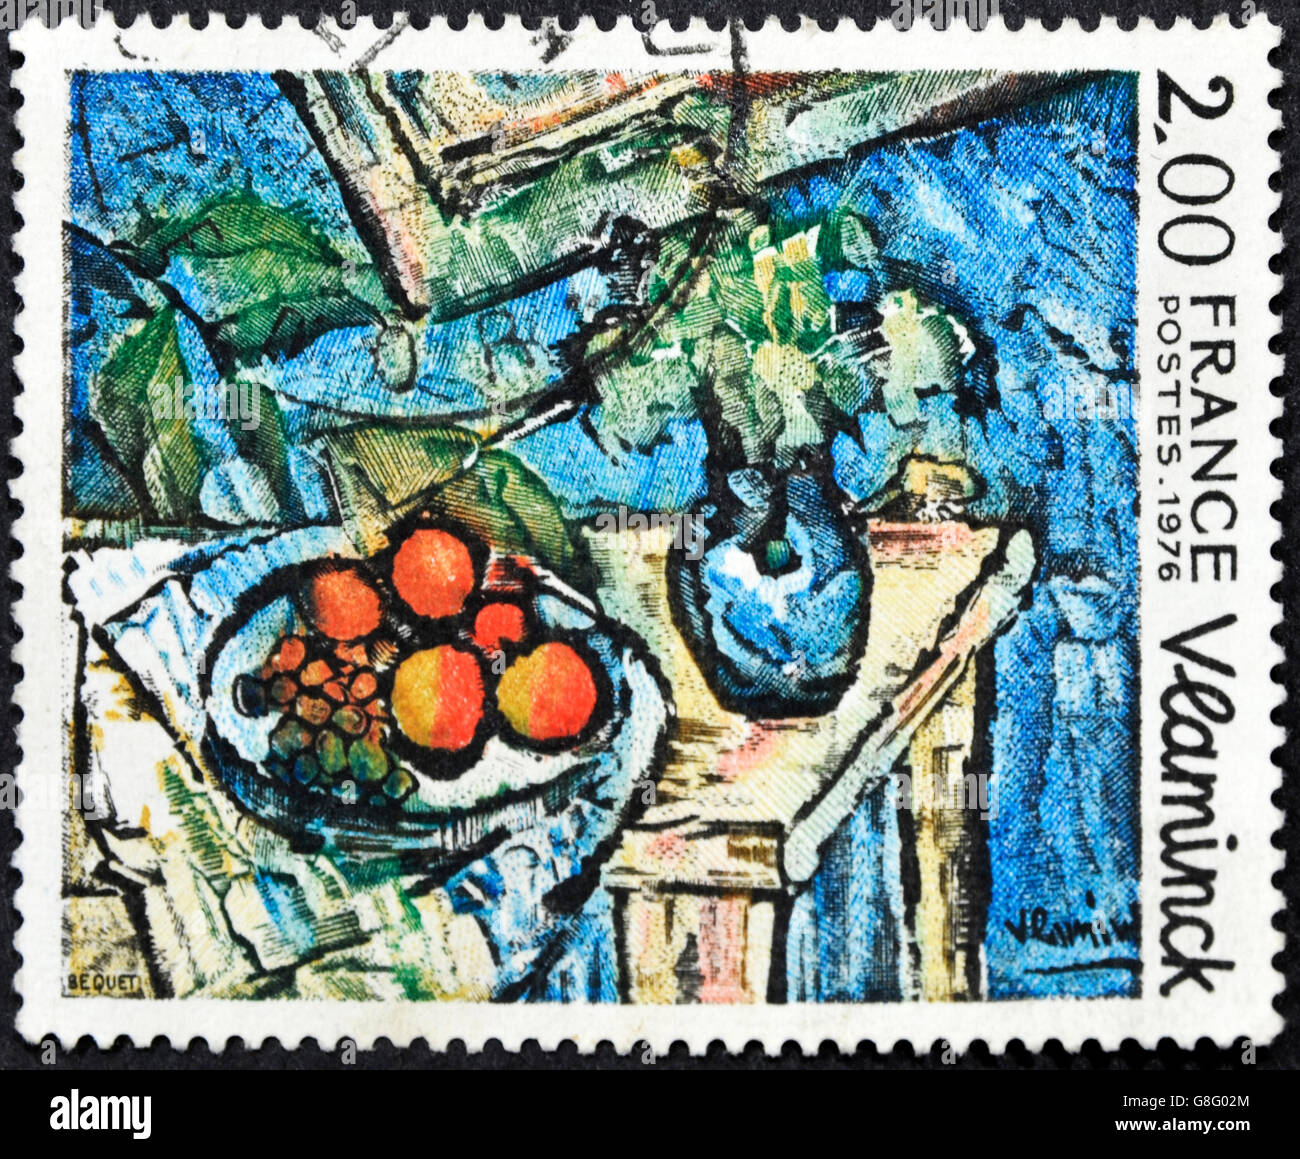 FRANCE - CIRCA 1976: A stamp printed in France shows the play 'Still Life' painted by Maurice De Vlaminck, circa 1976 Stock Photo